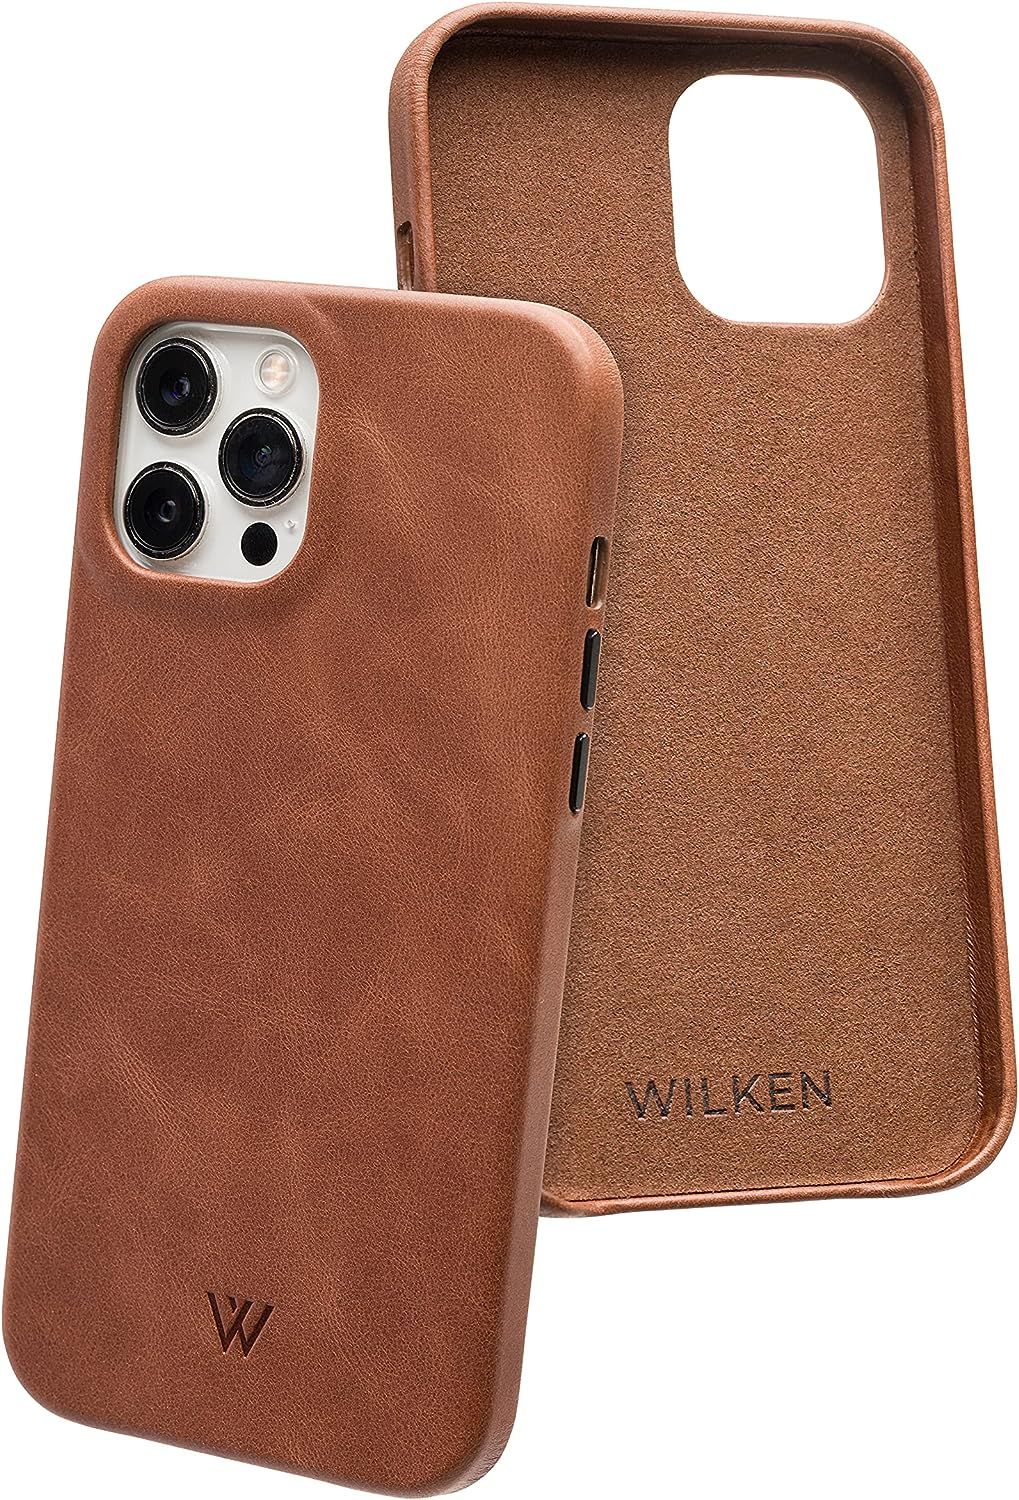 Wilken iPhone Leather Wrapped Case